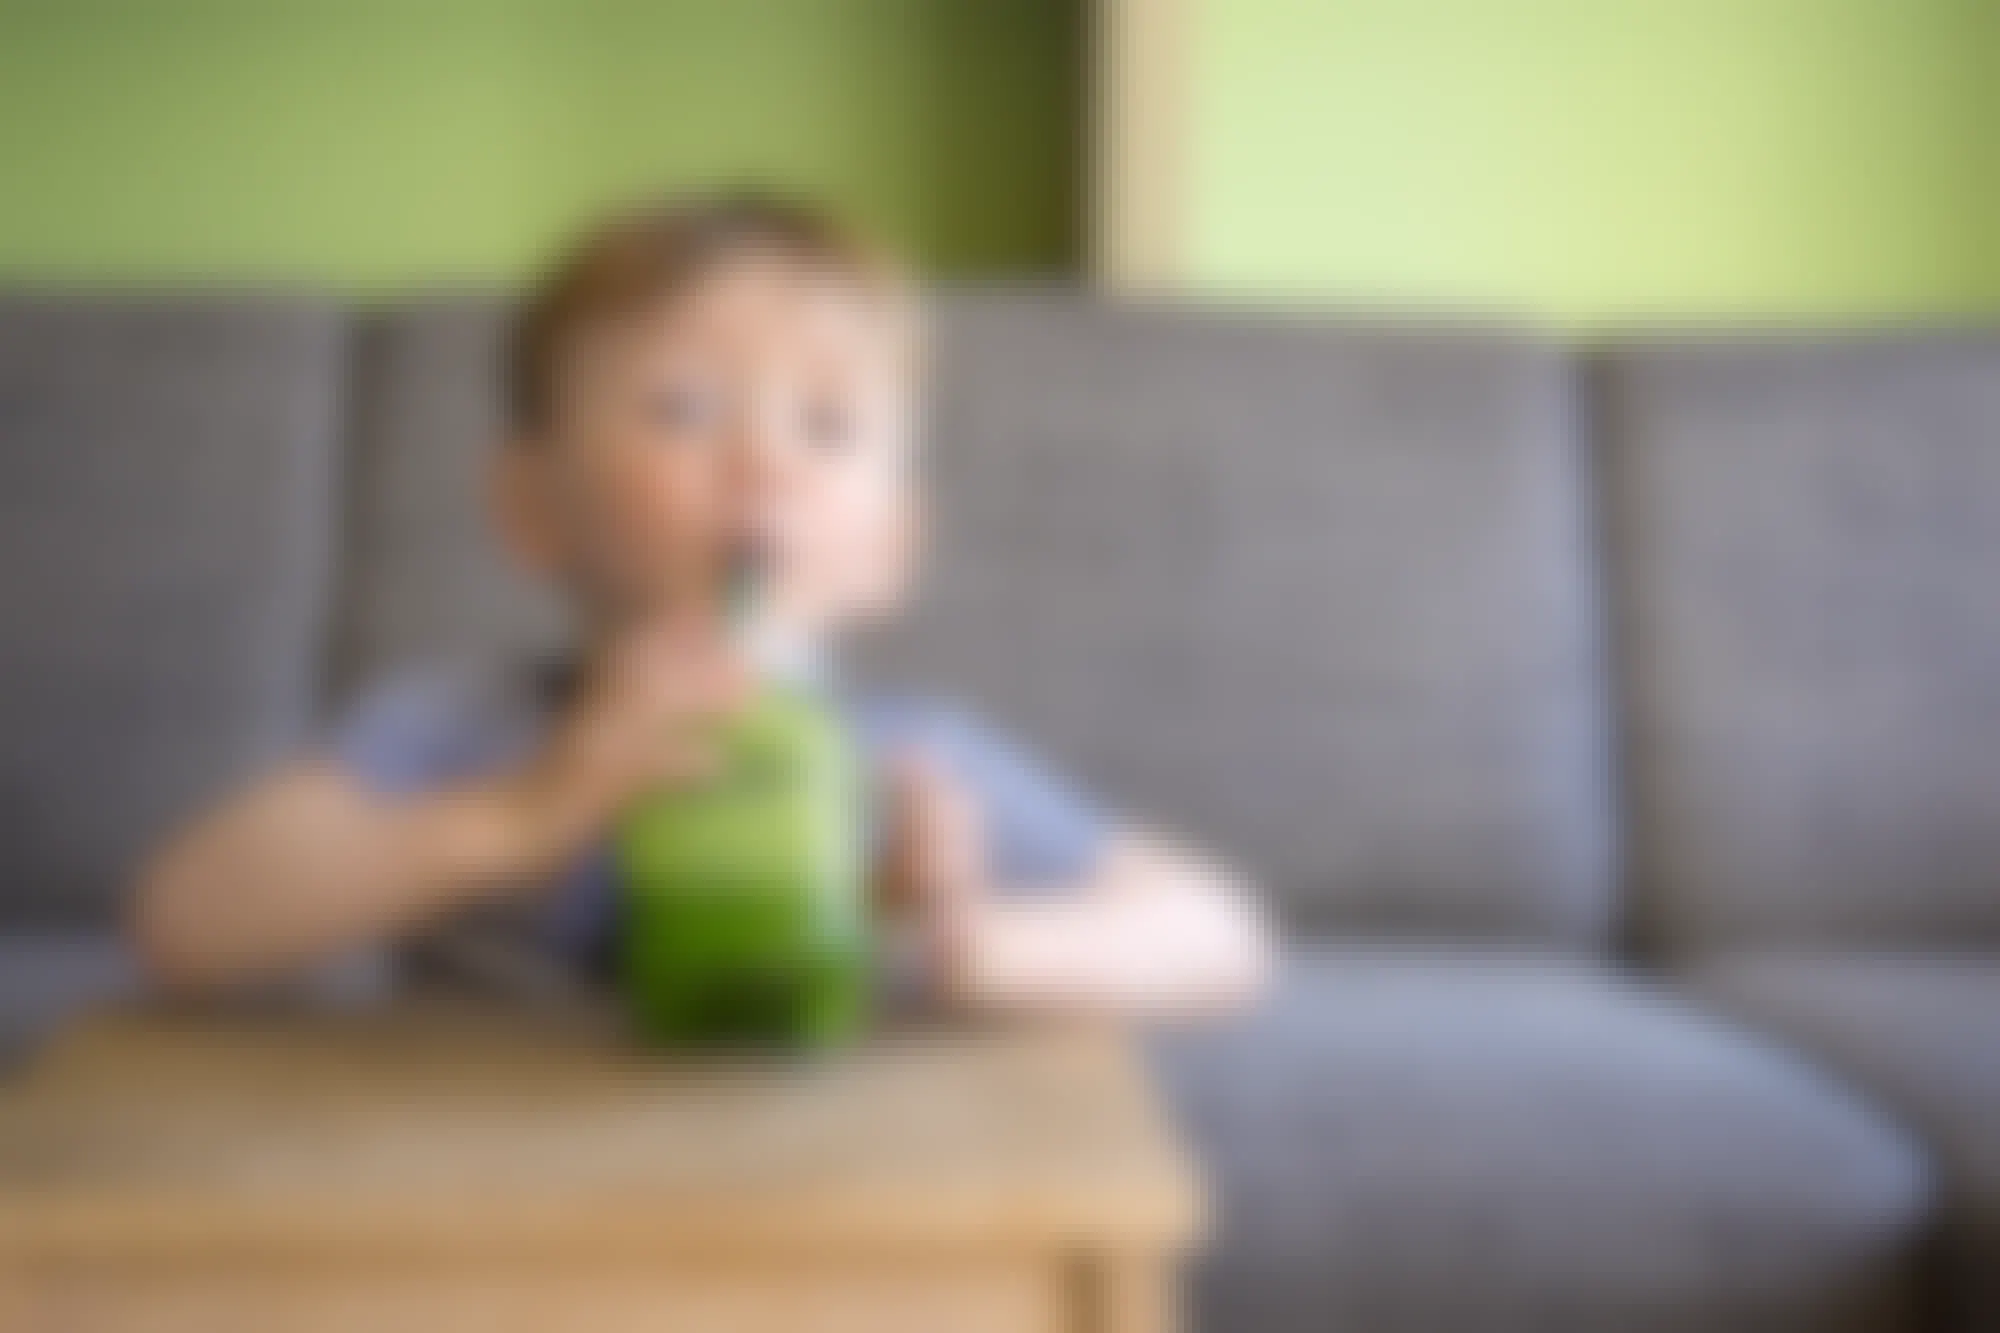 A child drinking a green smoothie out of a glass mug